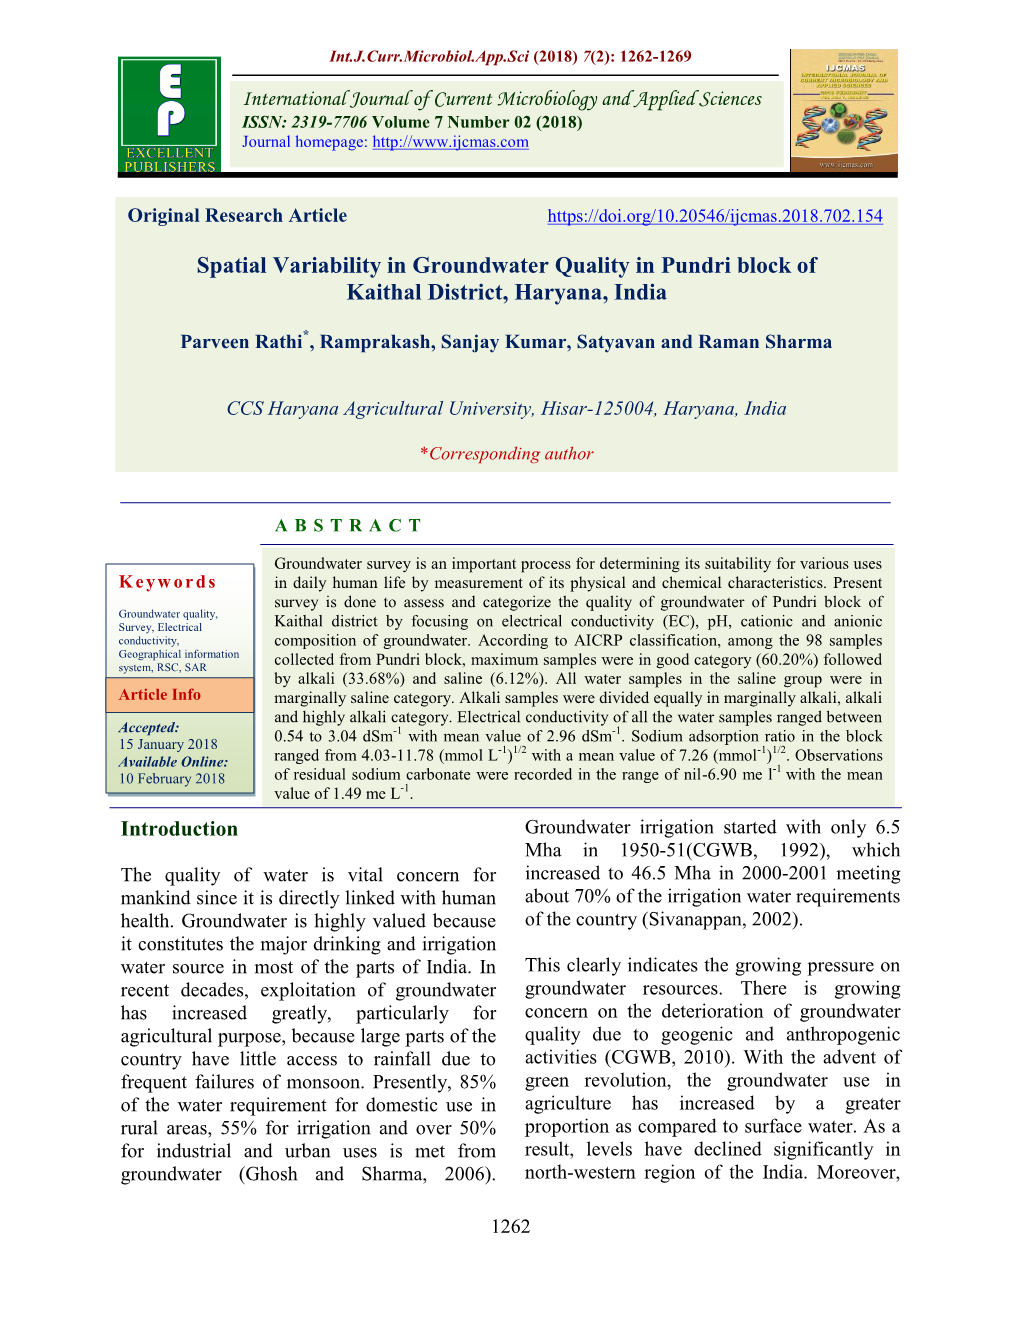 Spatial Variability in Groundwater Quality in Pundri Block of Kaithal District, Haryana, India